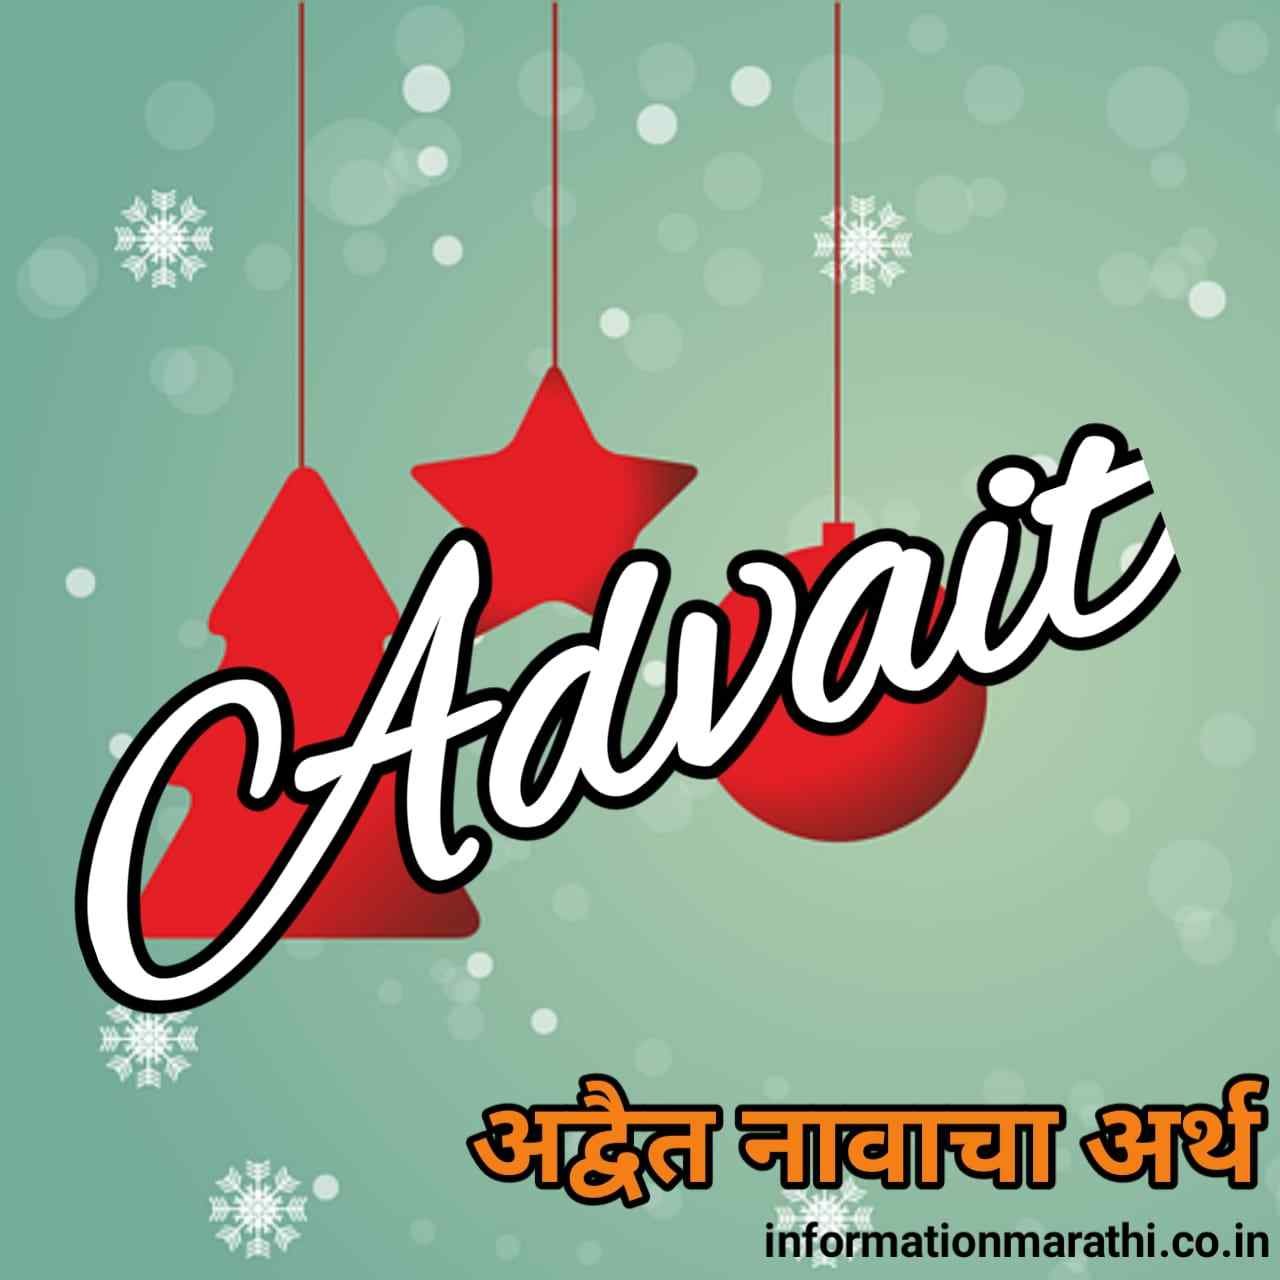 advait-meaning-in-marathi